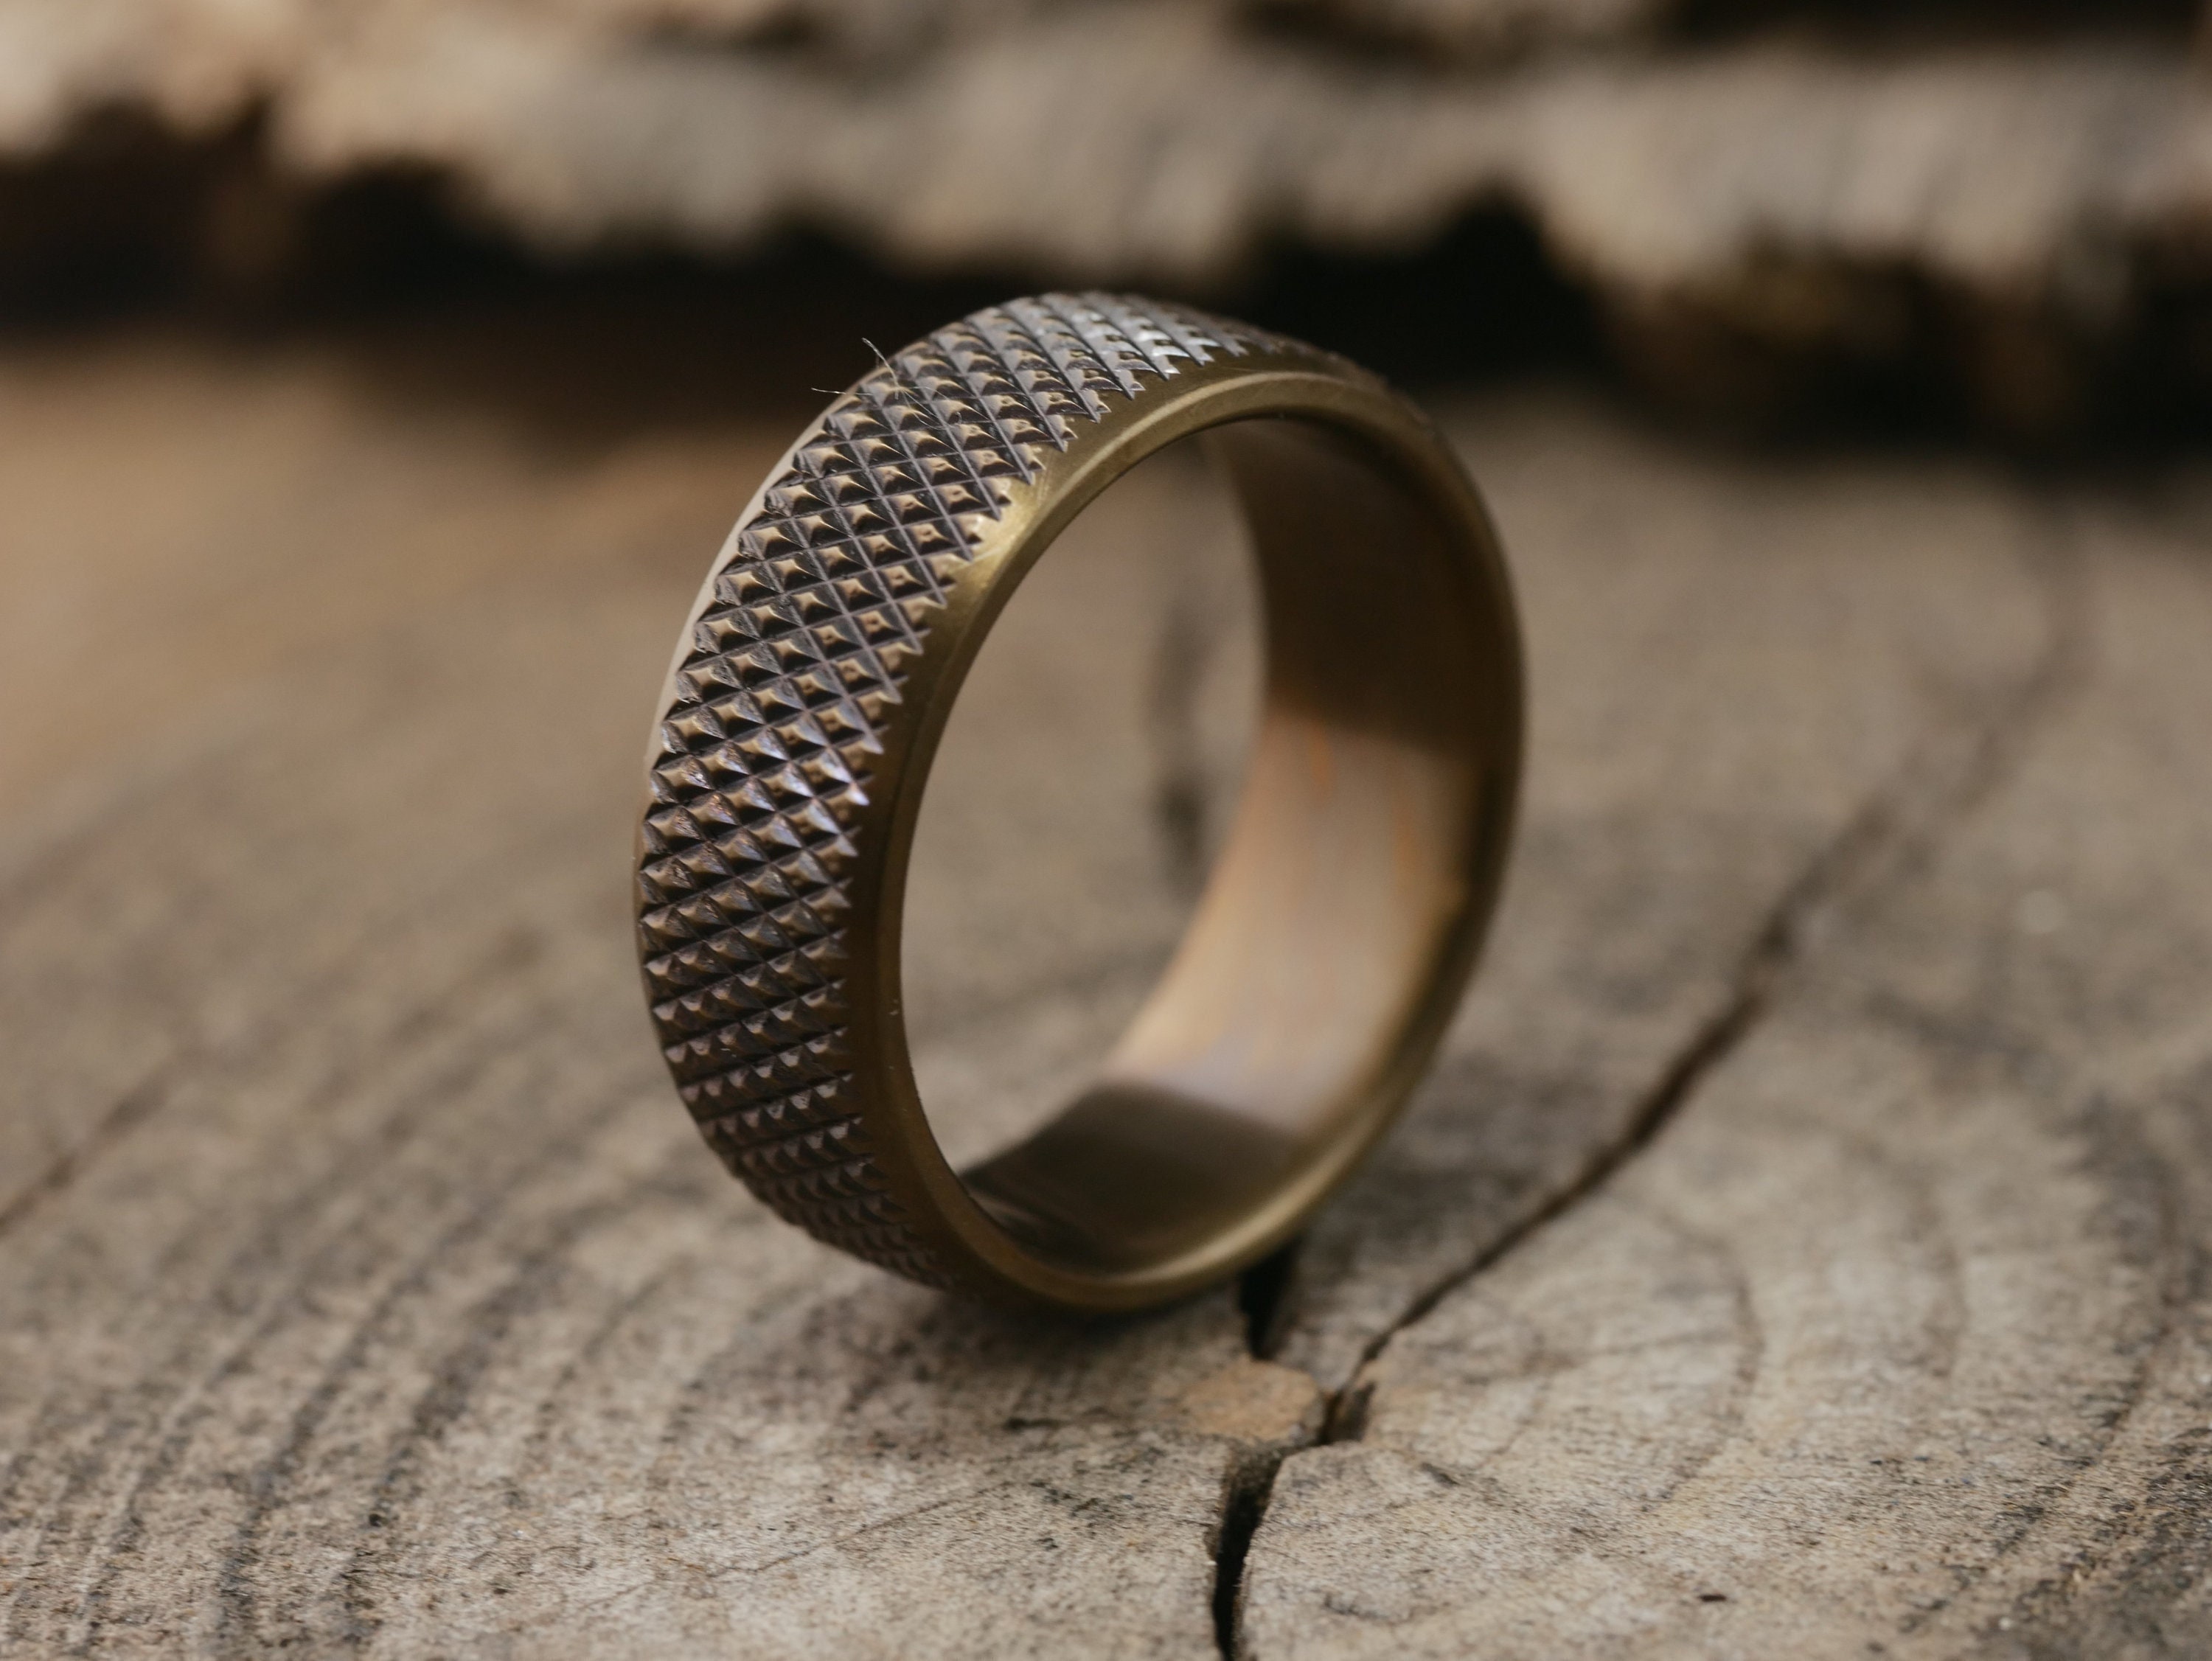 Wedding Anniversary Gifts for Him: The Ultimate Guide – Manly Bands